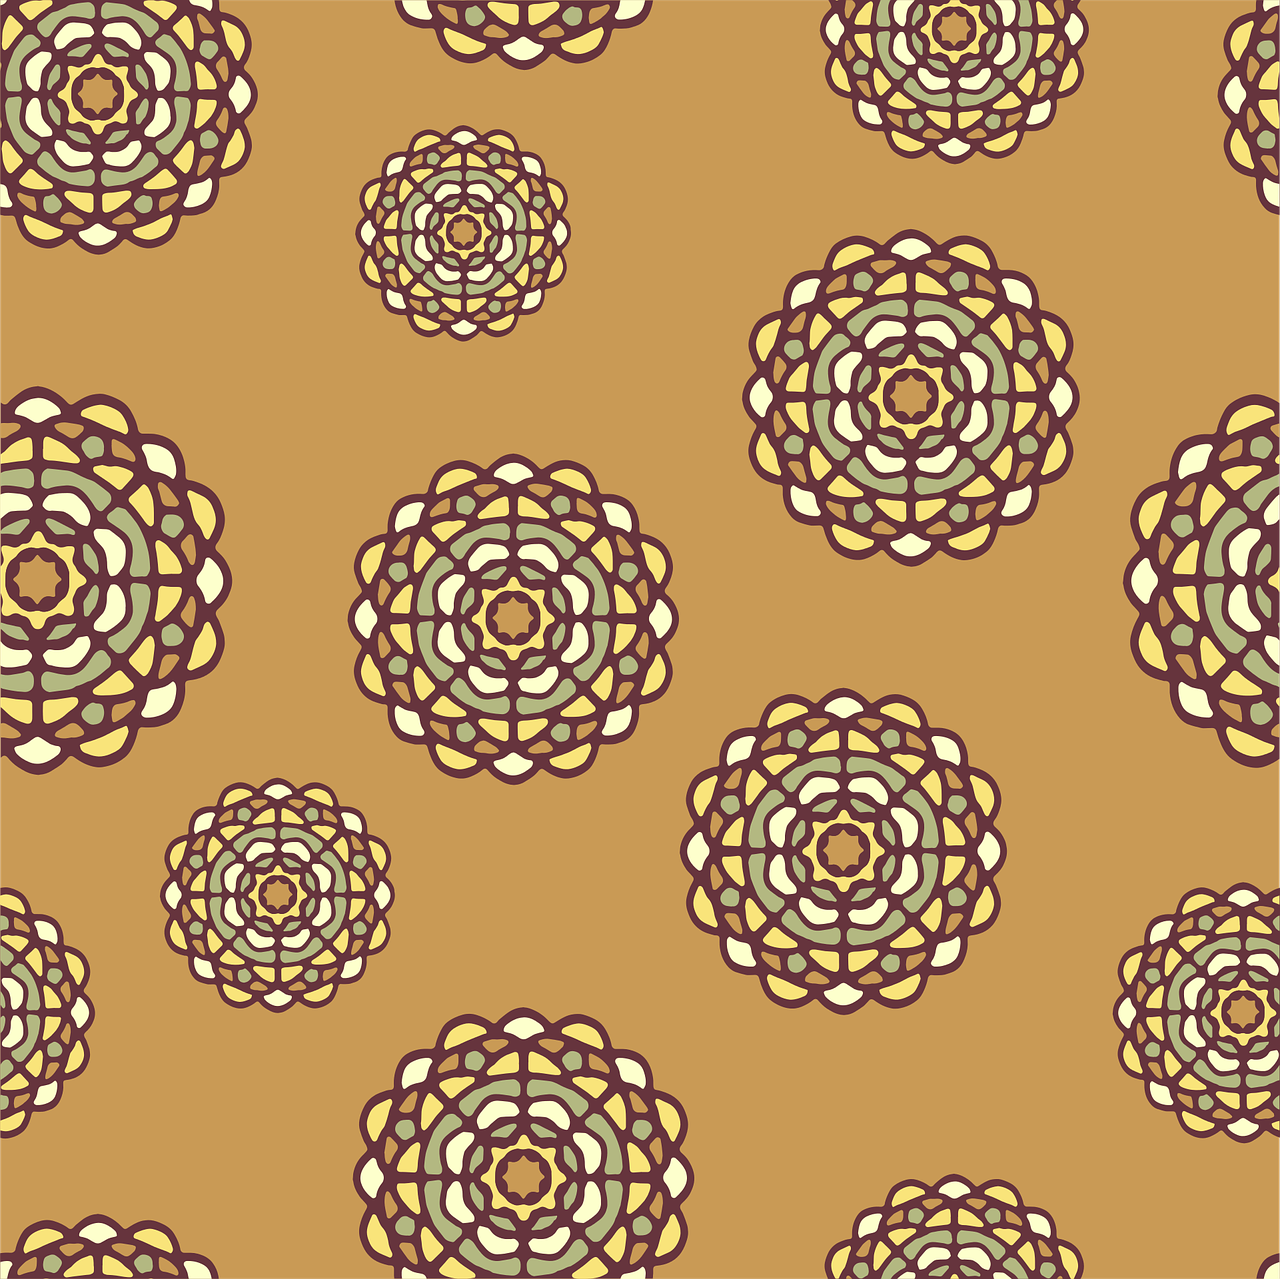 a pattern of flowers on a brown background, a digital rendering, inspired by Francis Focer Brown, art nouveau, many floating spheres, some sandy yellow pillows, gaudi style”, concentric circles